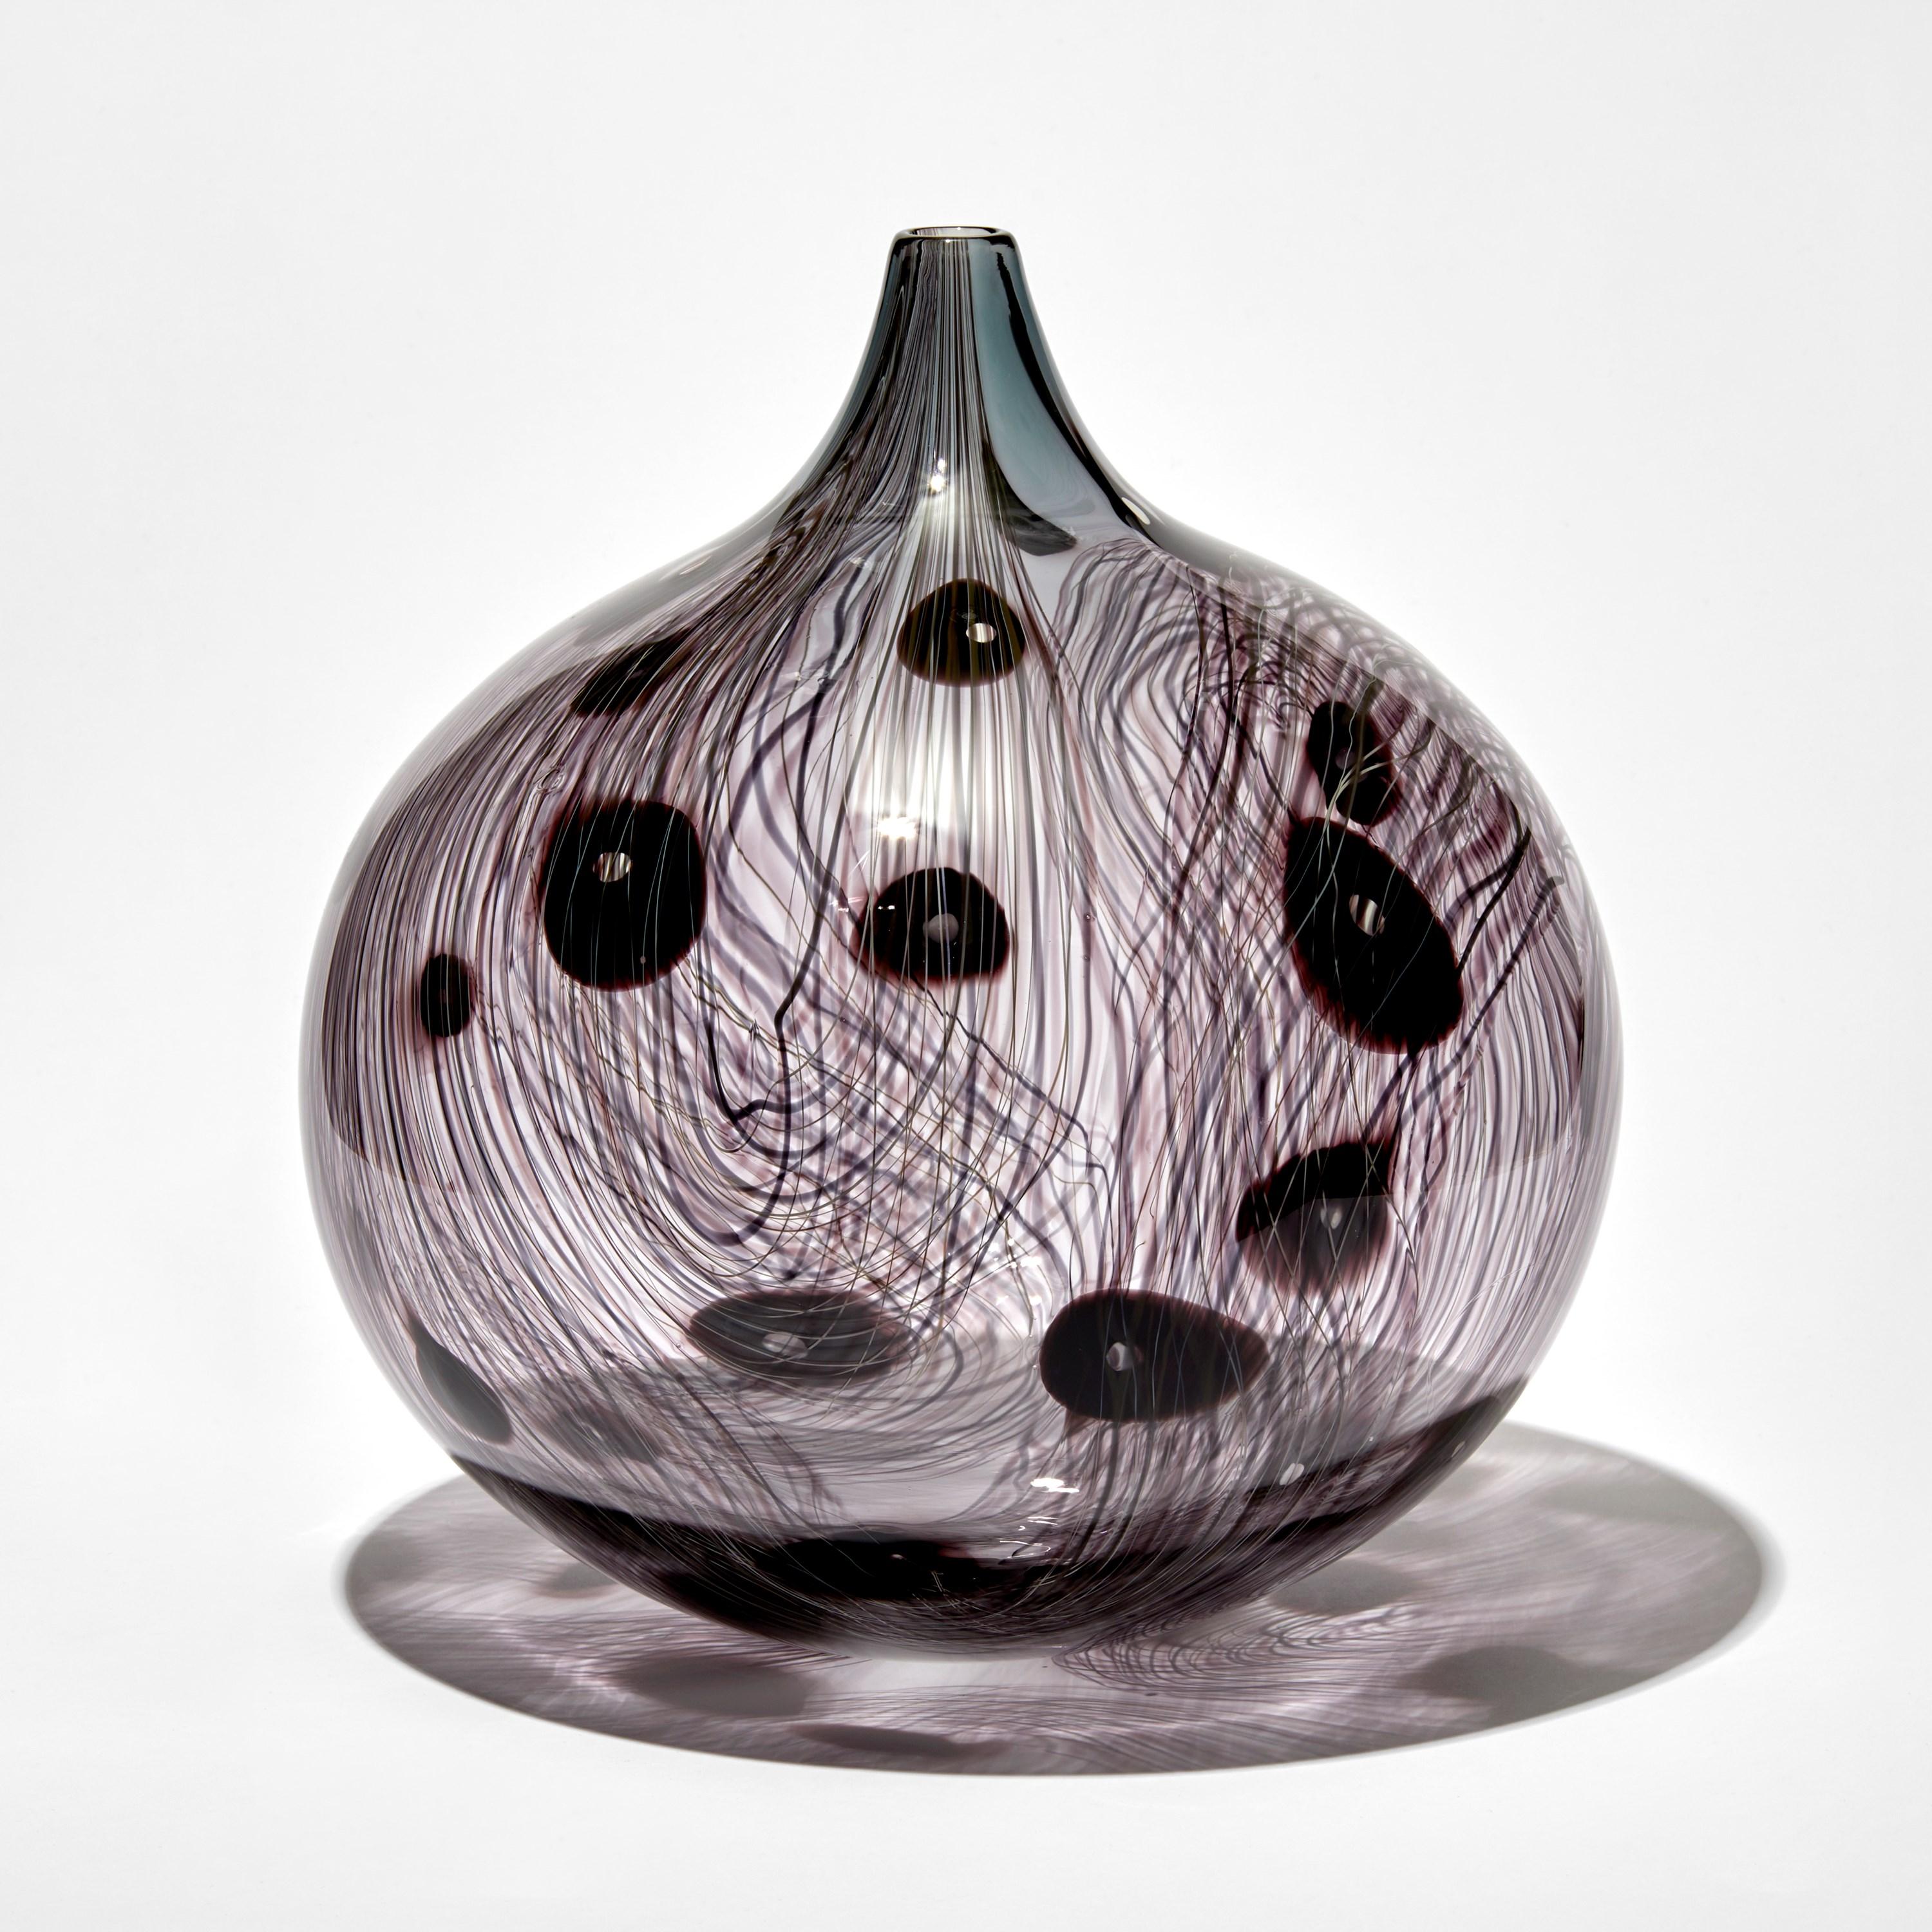 'Rings V' is a unique glass artwork by the Swedish artist, Ann Wåhlström.

In her career, Wåhlström has designed wares for many international companies; glasses for the likes of Ikea and Kosta Boda, ceramics, metals and textiles for brands from